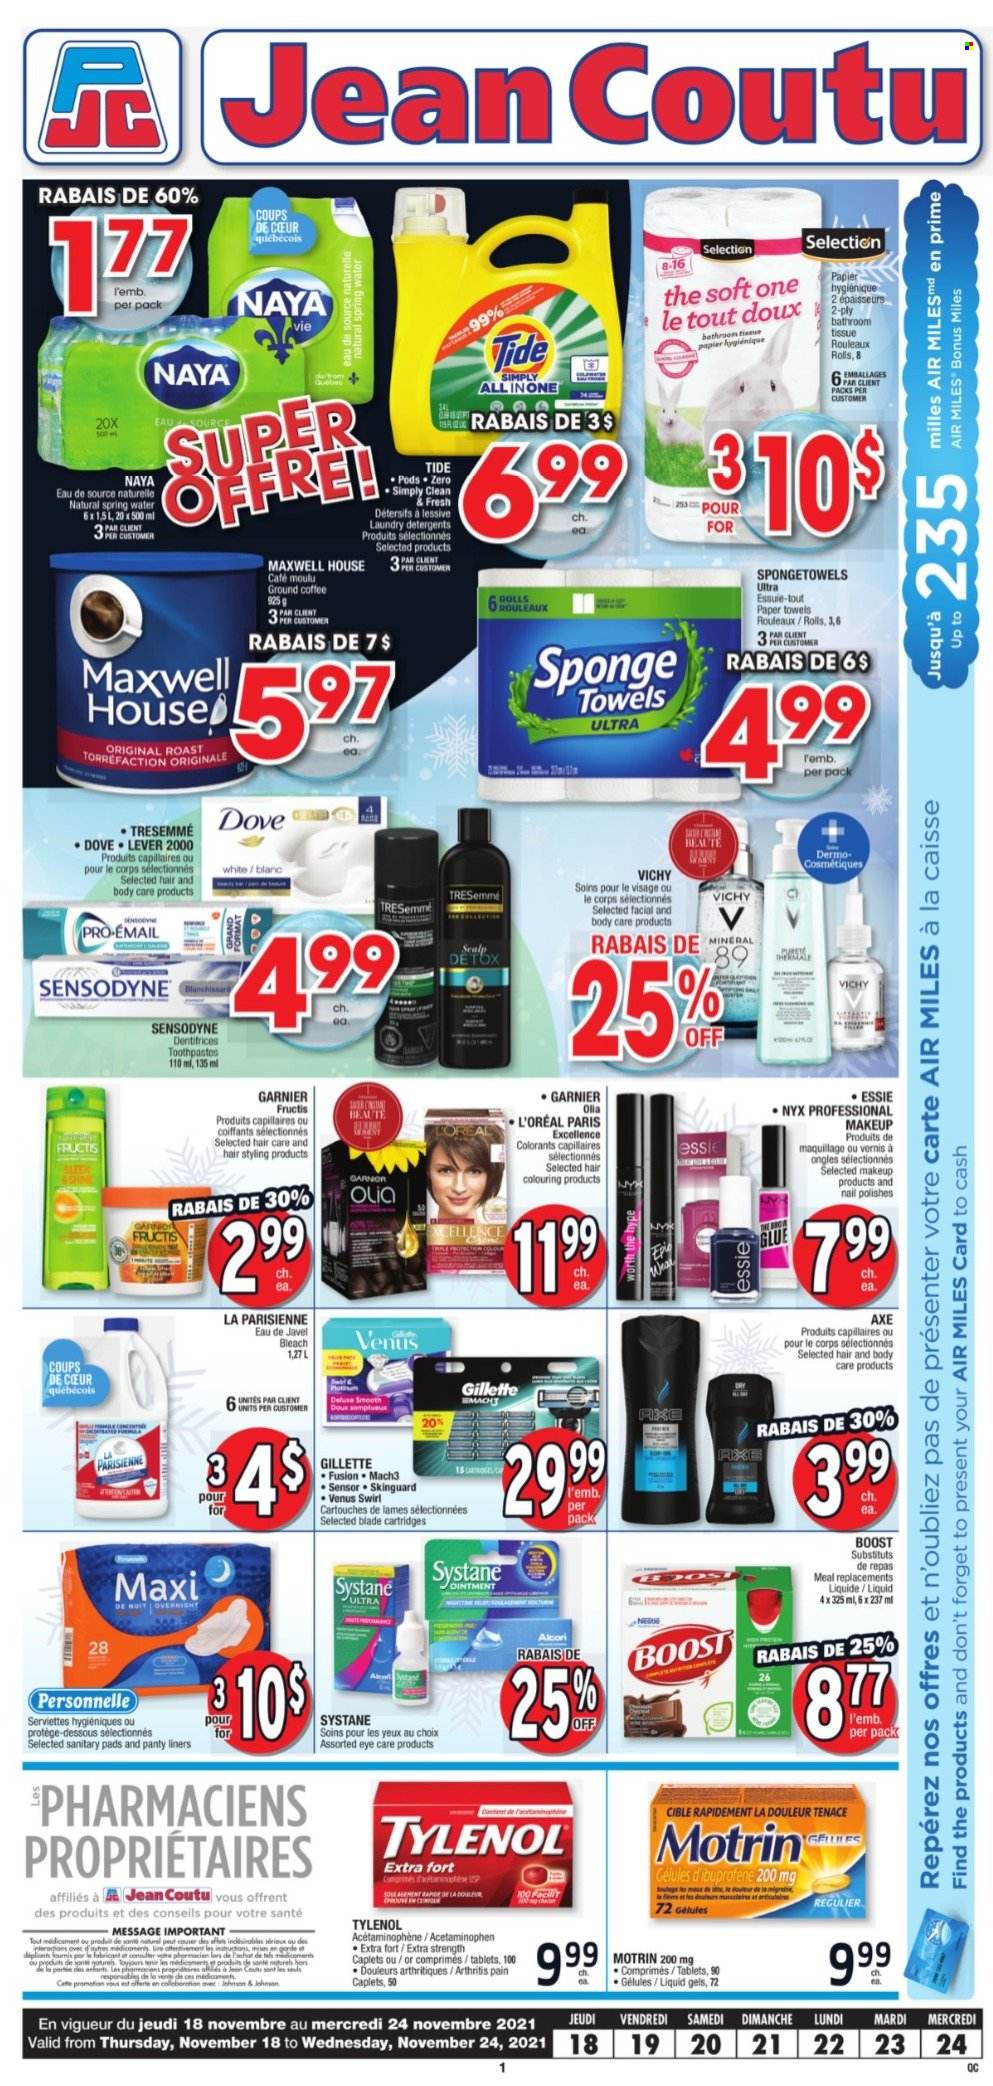 thumbnail - Jean Coutu Flyer - November 18, 2021 - November 24, 2021 - Sales products - spring water, Boost, Maxwell House, coffee, ground coffee, L'Or, Johnson's, ointment, bath tissue, kitchen towels, paper towels, bleach, Tide, Vichy, sanitary pads, L’Oréal, NYX Cosmetics, TRESemmé, Fructis, Venus, makeup, sponge, glue, presenter, Tylenol, Motrin, Sol, Dove, Garnier, Gillette, Systane, Sensodyne. Page 1.